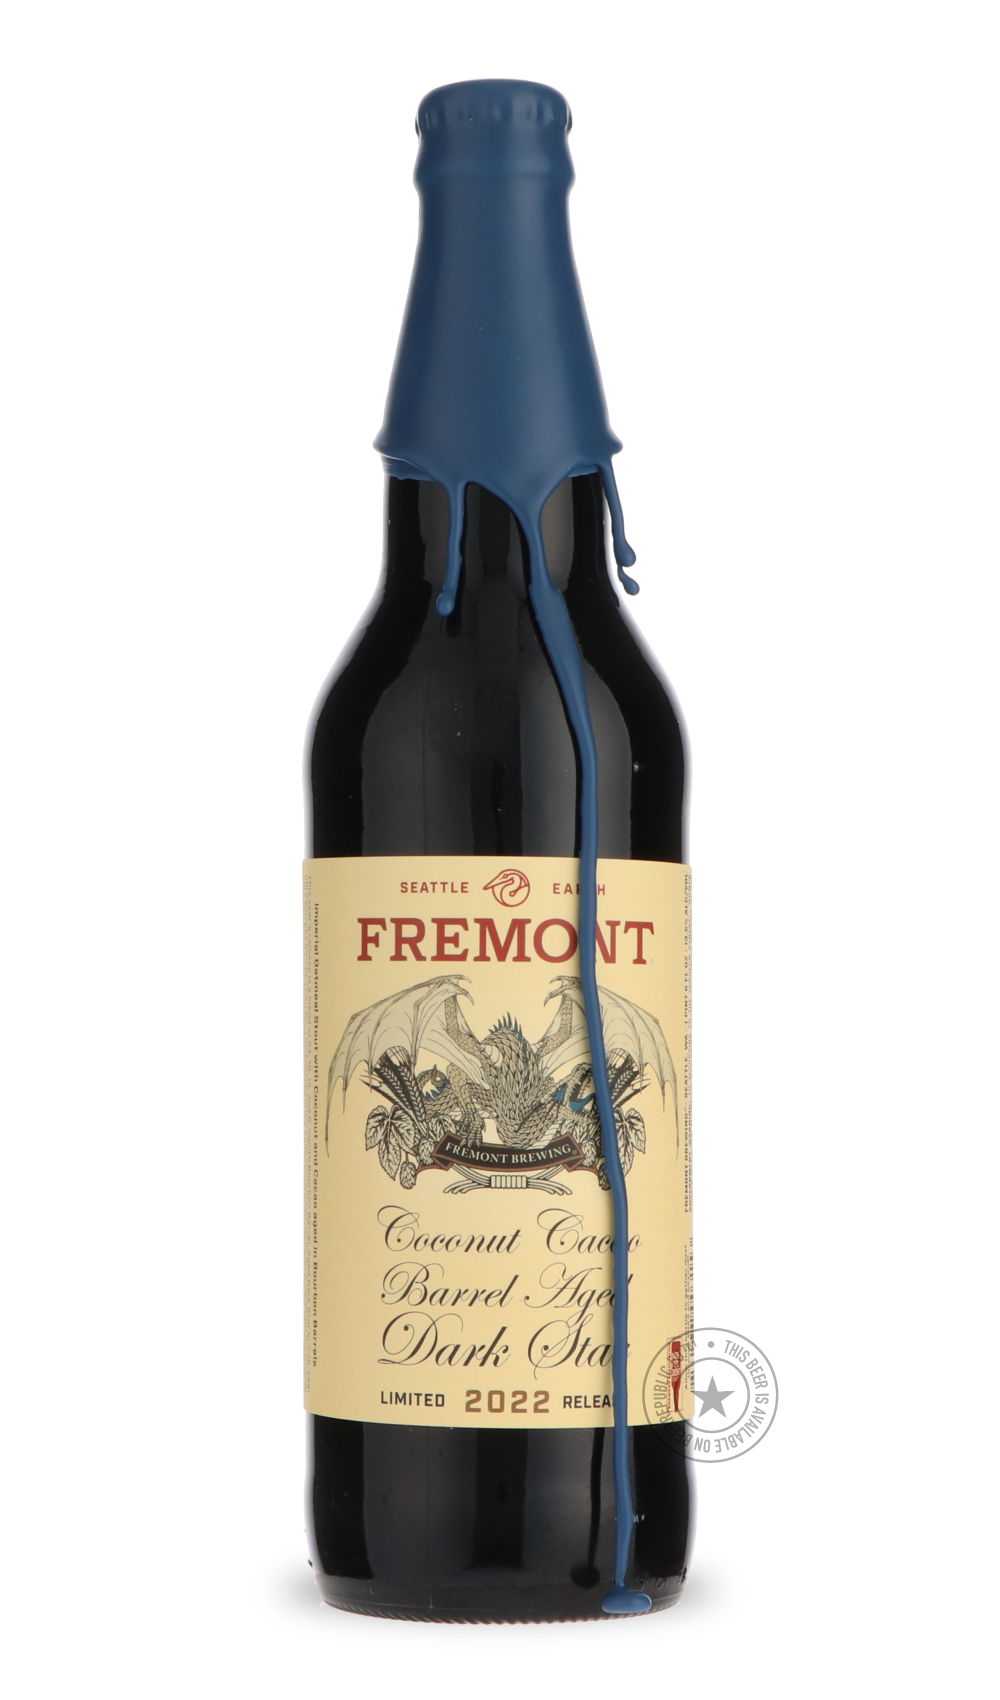 -Fremont- Coconut Cacao Barrel Aged Dark Star 2022-Stout & Porter- Only @ Beer Republic - The best online beer store for American & Canadian craft beer - Buy beer online from the USA and Canada - Bier online kopen - Amerikaans bier kopen - Craft beer store - Craft beer kopen - Amerikanisch bier kaufen - Bier online kaufen - Acheter biere online - IPA - Stout - Porter - New England IPA - Hazy IPA - Imperial Stout - Barrel Aged - Barrel Aged Imperial Stout - Brown - Dark beer - Blond - Blonde - Pilsner - Lage